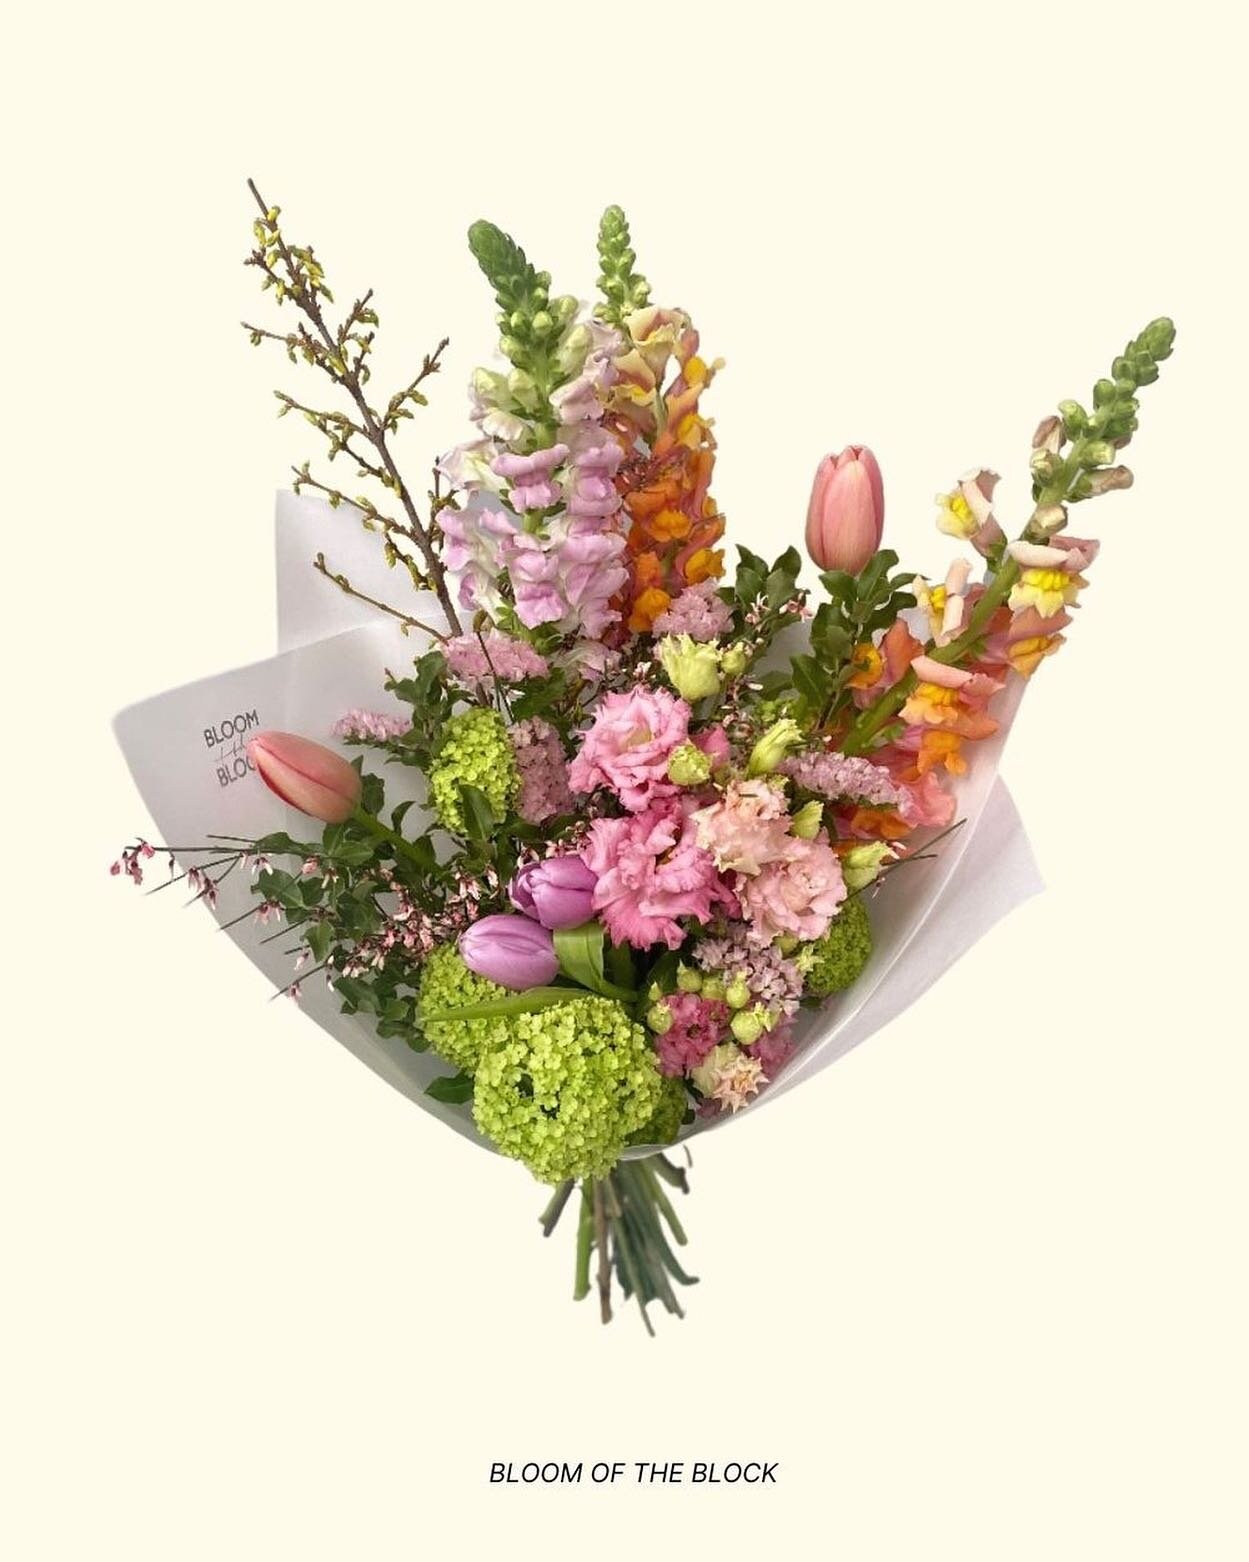 Mother&rsquo;s Day Flowers Now Online 💕

You may recognise this selection from last year - why change a good thing! The selection turned out so well last year we&rsquo;re doing it twice.

All online to order for collection and delivery from fri 8th 